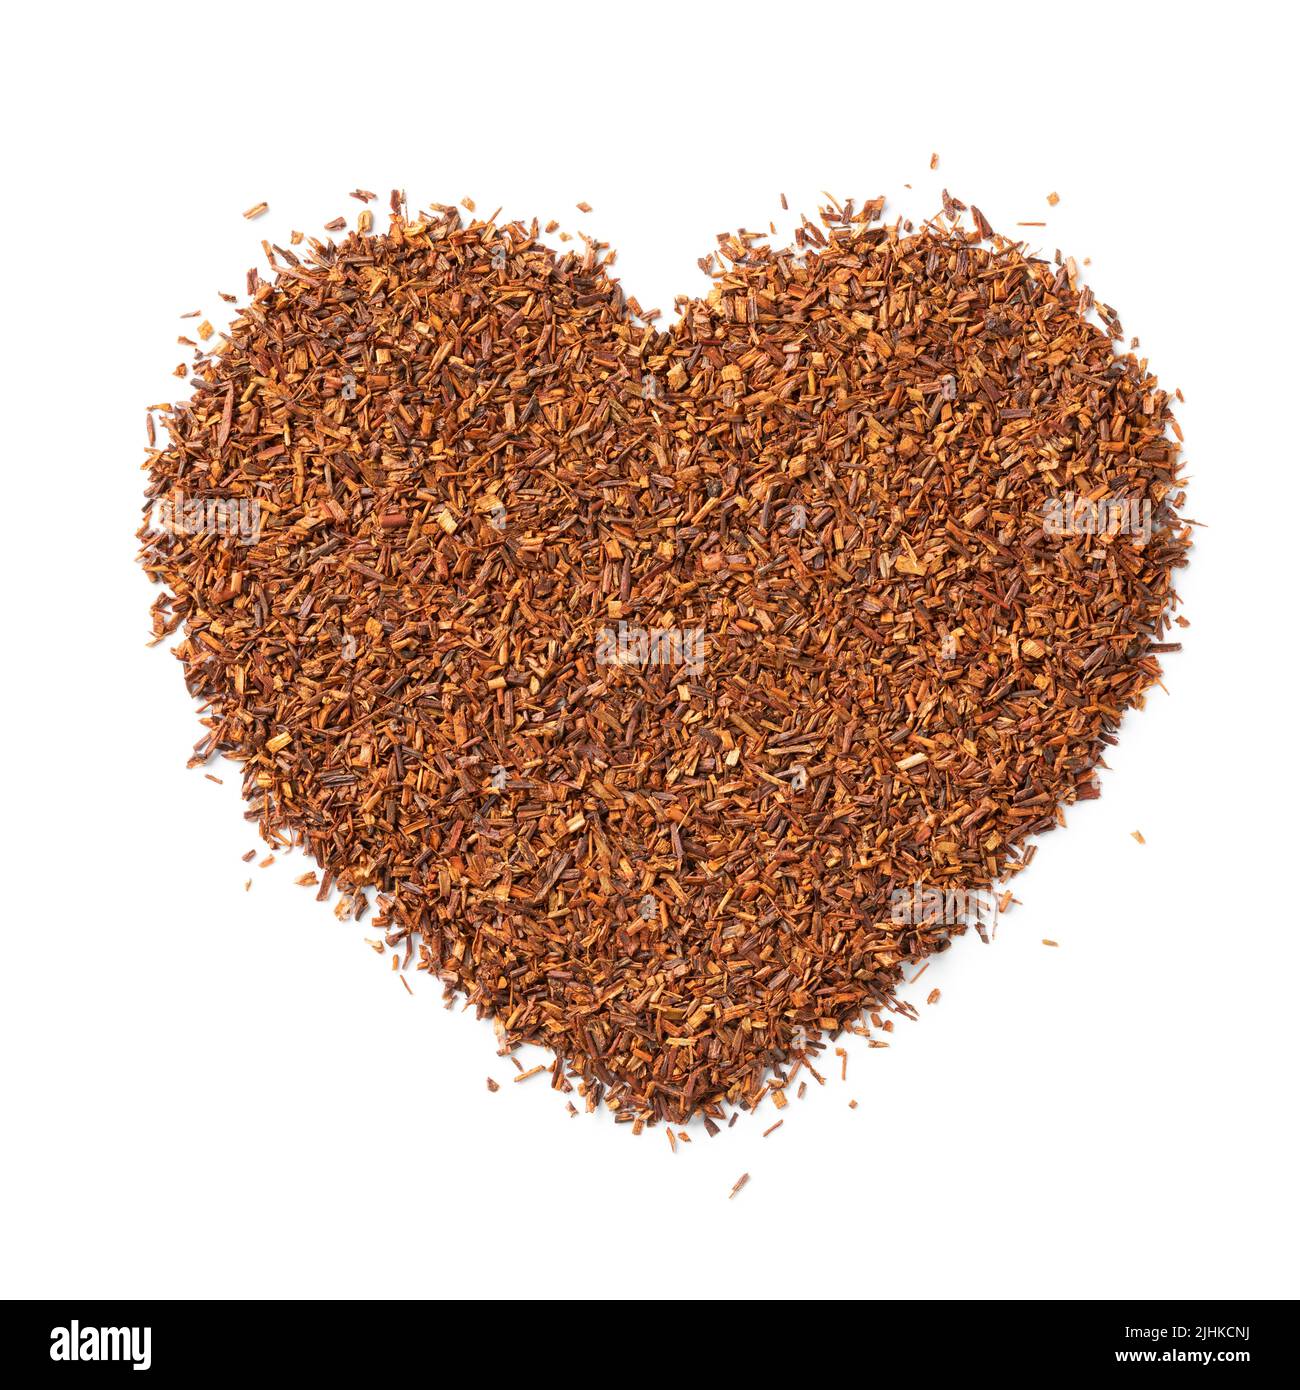 Dried rooibos, bush tea, red tea, redbush tea leaves from South Africa in heart shape oisolated on white background close up Stock Photo